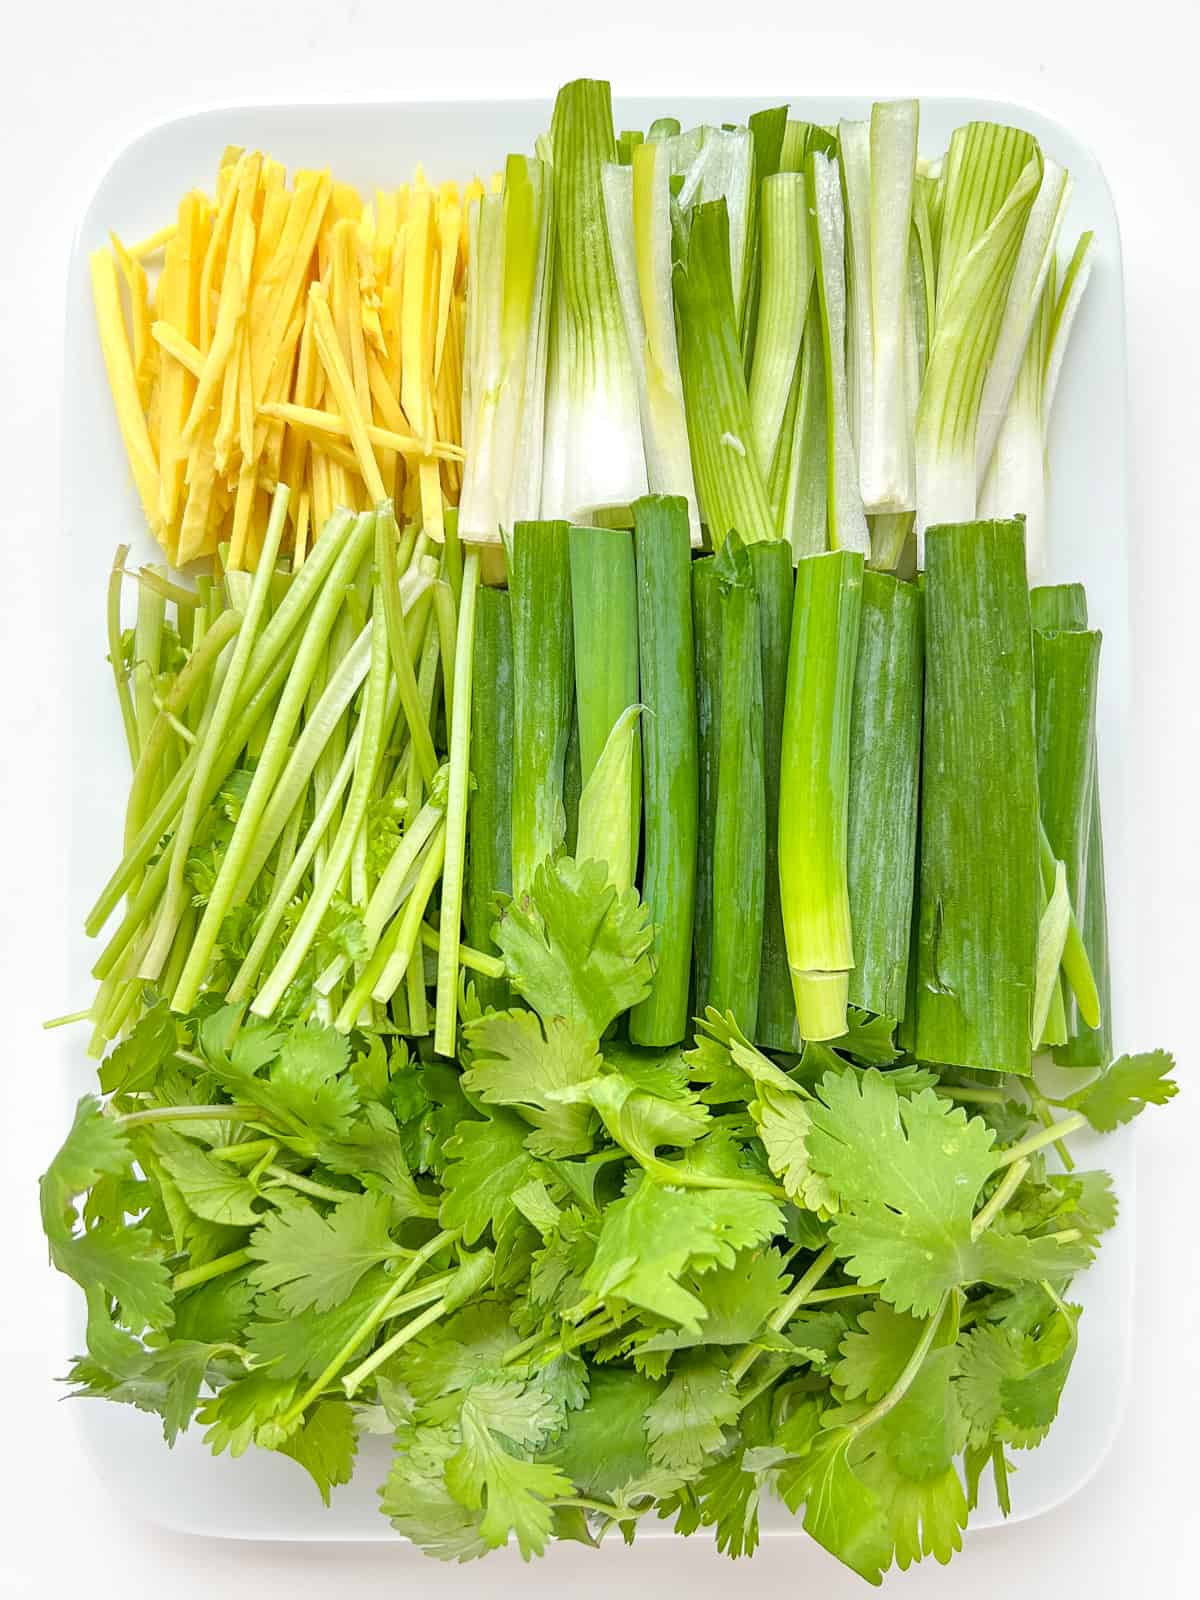 An image of all the vegetables used in this recipe, cut in size and ready to cook.